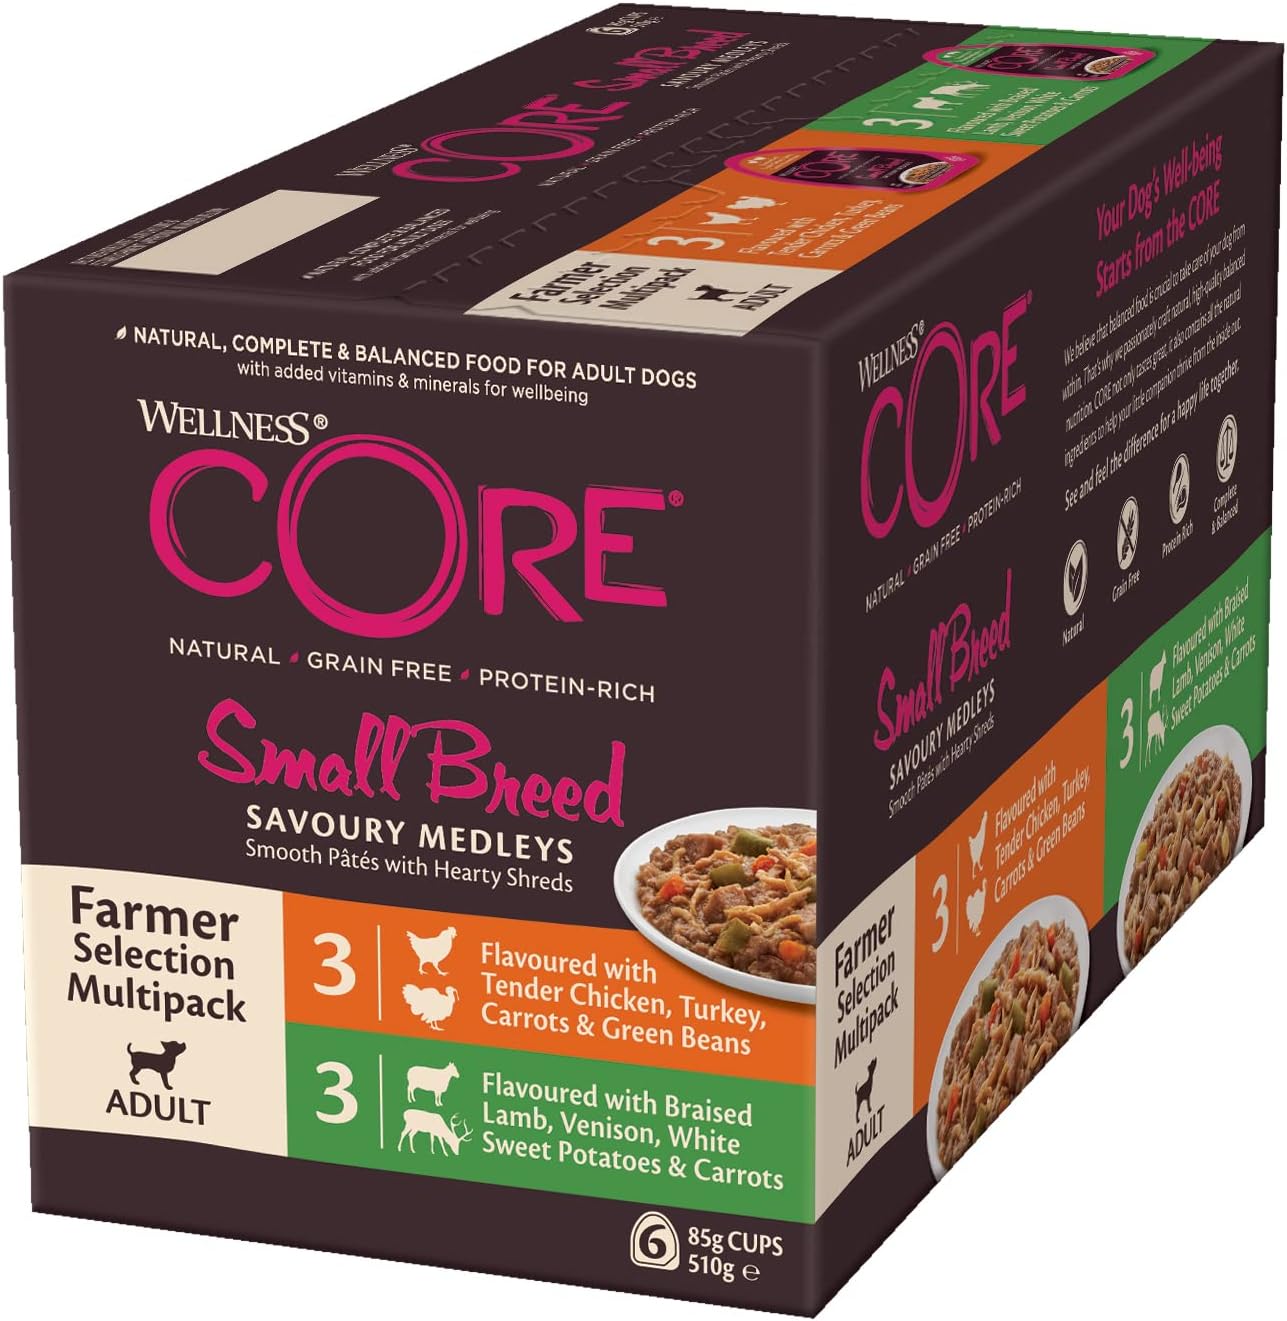 Wellness CORE Small Breed Savoury Medleys, Wet Dog Food Small Dogs, Dog Food Wet Smaller Breed, Grain Free, High Meat Content, Farmer Selection Mix, 85 G (Pack Of 6)?10458